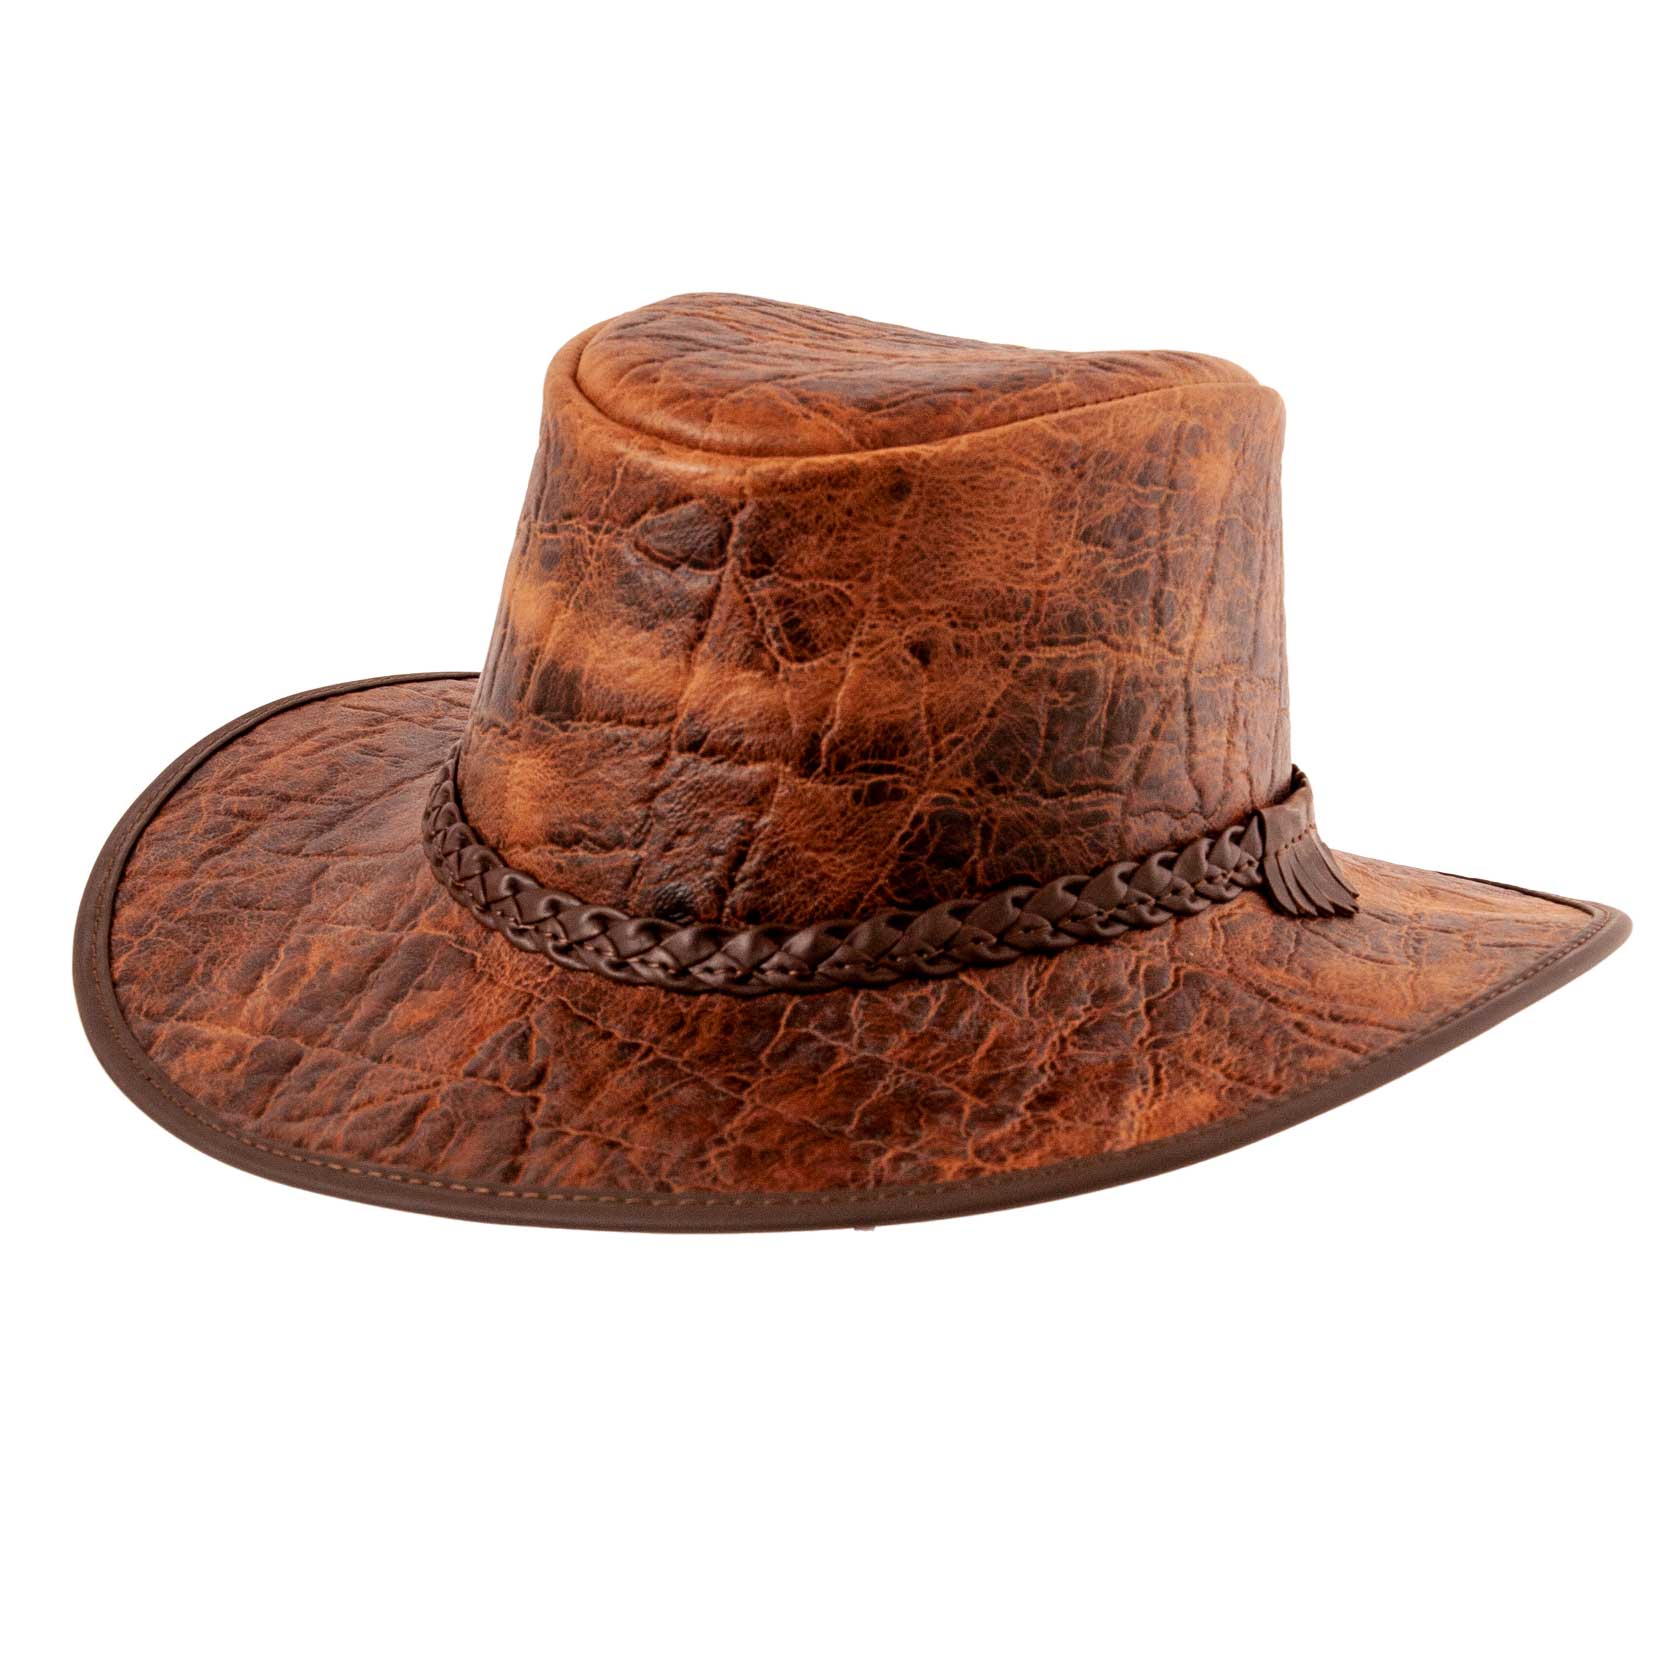 Australian Outback Leather Hat - Limited Edition